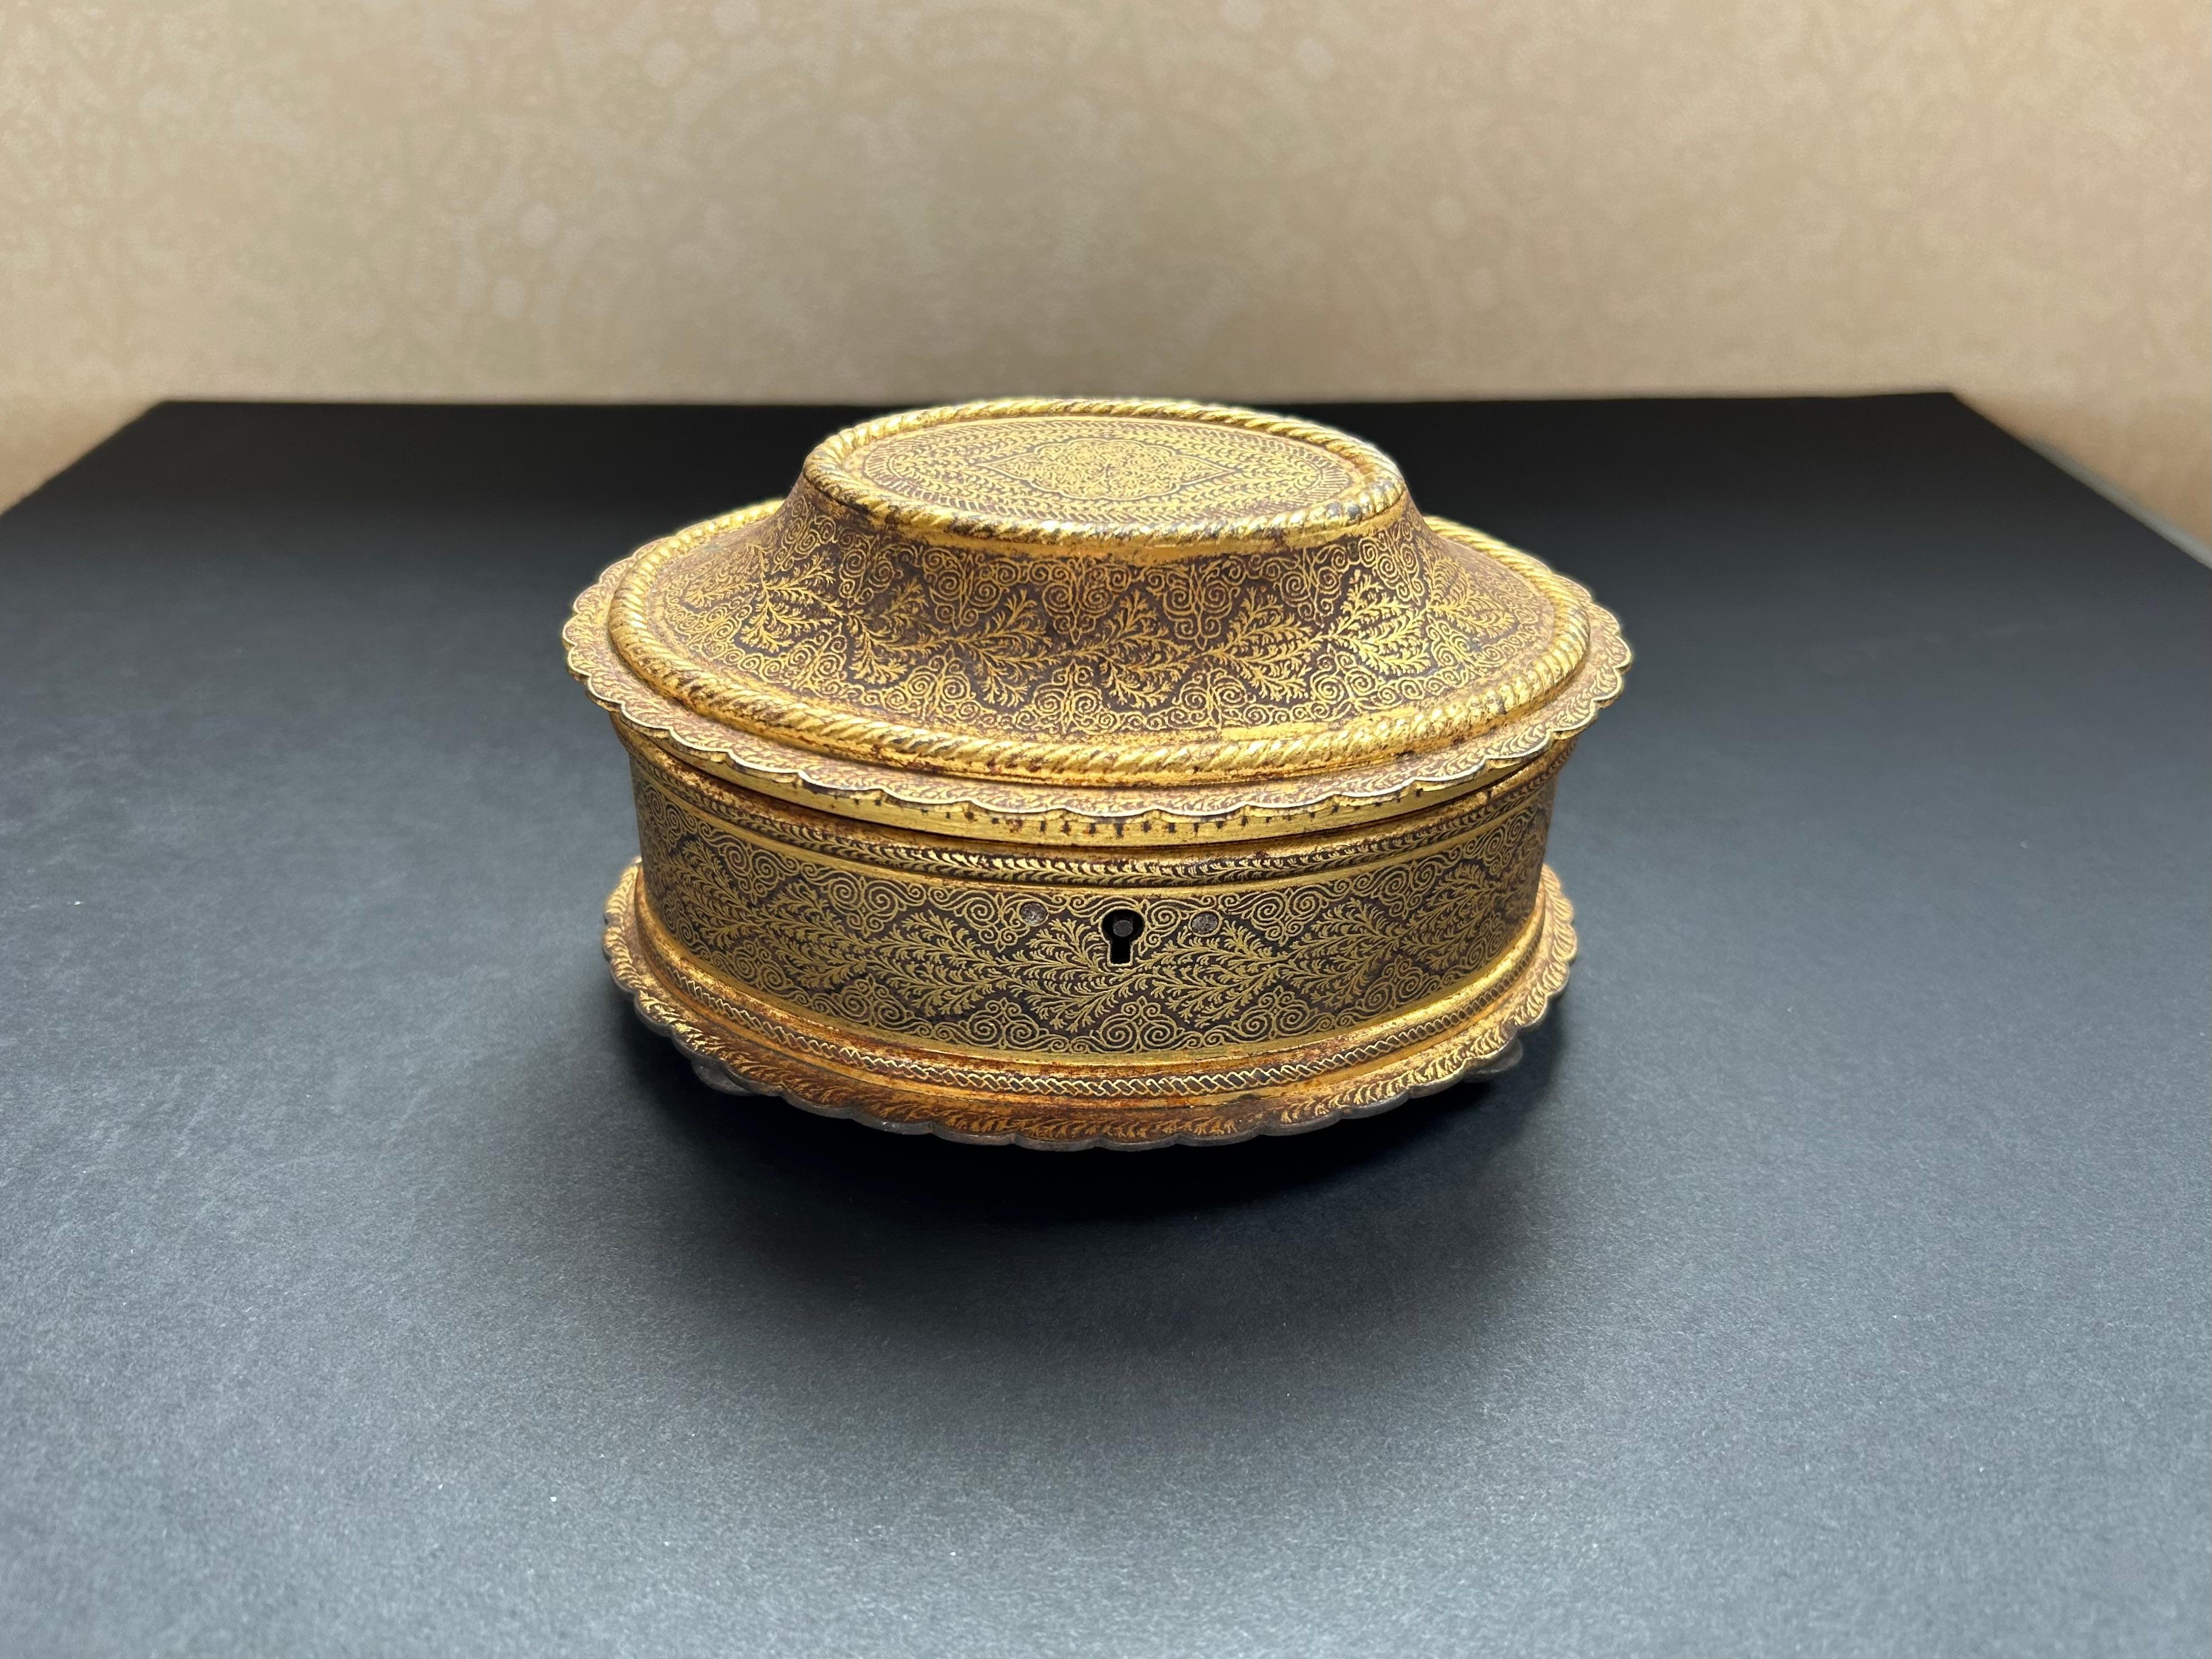 An exquisite Indian Koftgari work box, or jewelry box, circa 1900, in oval shape. Featuring very fine, gold thread decoration with three silvered bun feet and a silvered base. The lid opens to reveal a worn, red velvet interior, typical of luxury